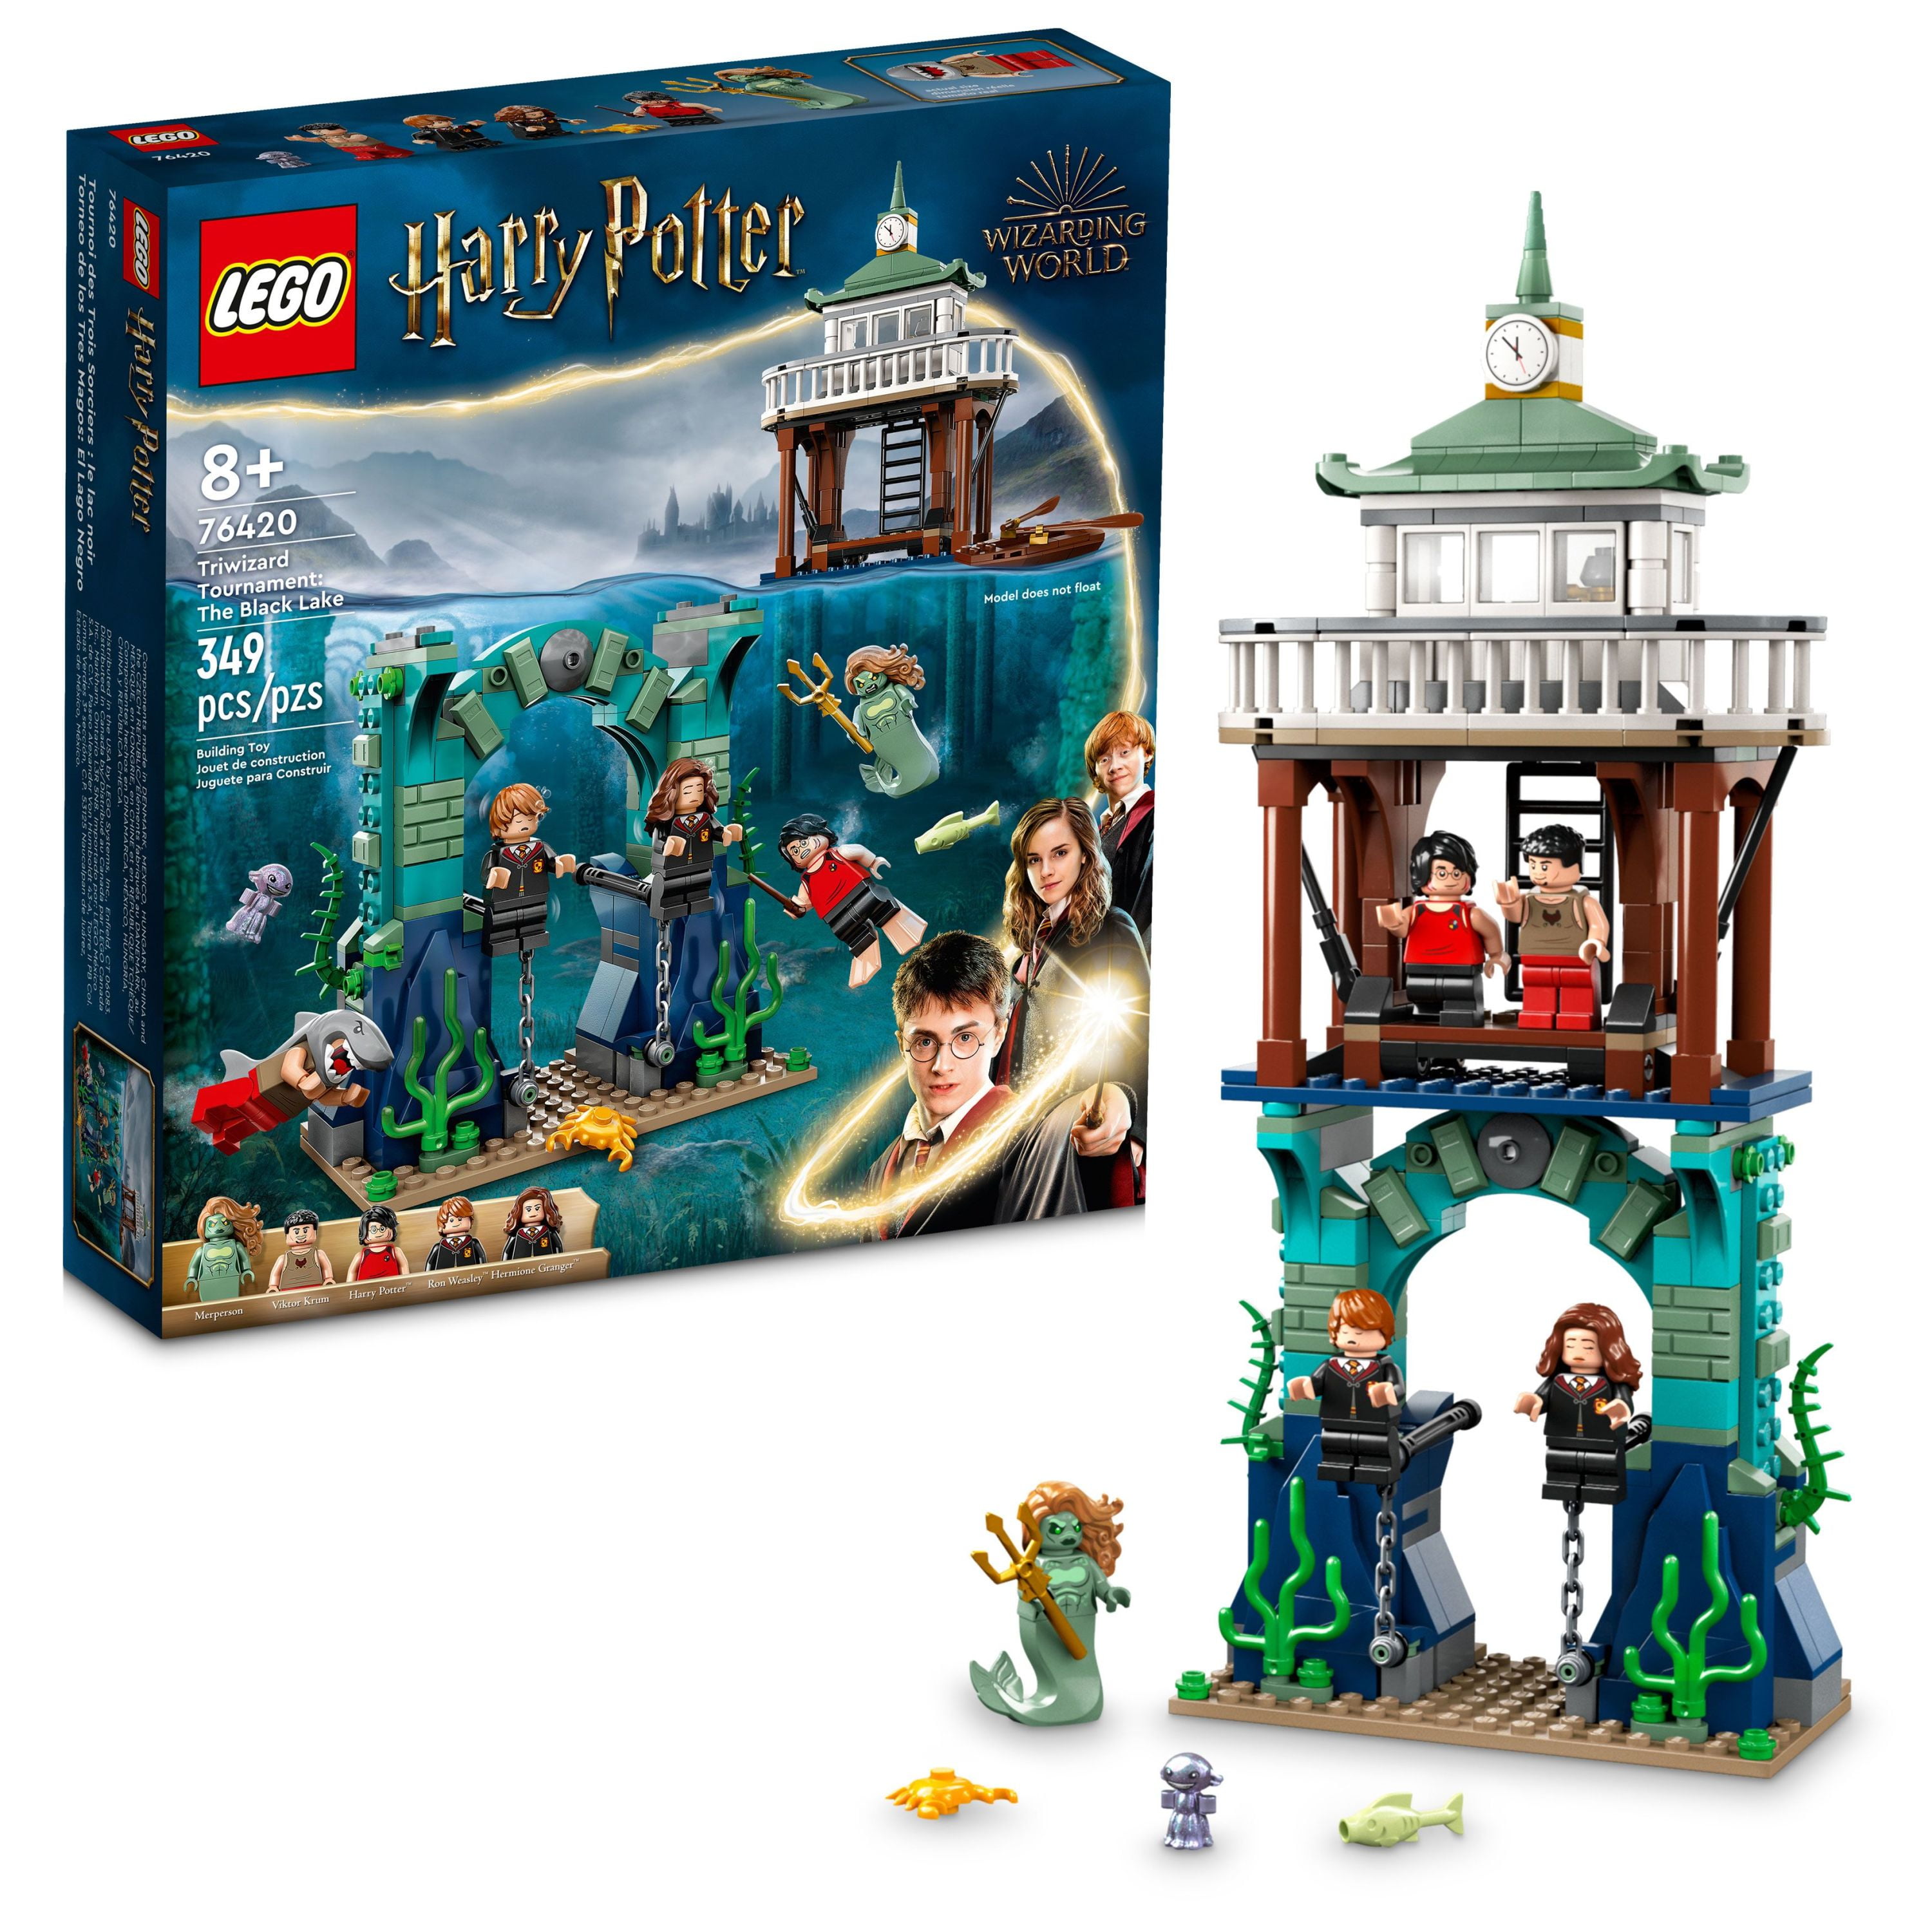 LEGO Harry Potter Triwizard Tournament: The Black Lake Building Set 76420 -  Goblet of Fire Toy Playset with Harry, Hermione, and Ron Minifigures